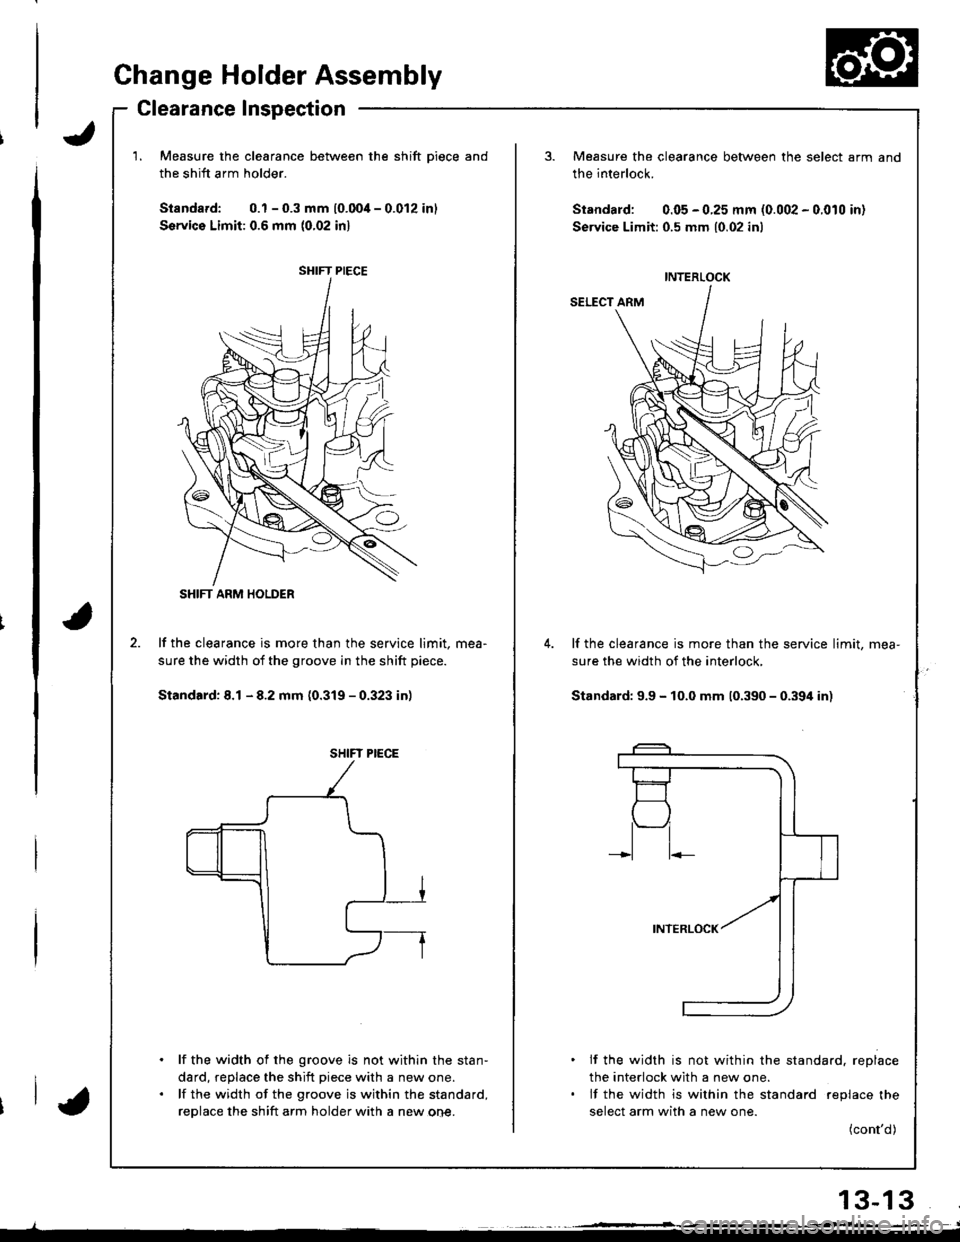 HONDA INTEGRA 1998 4.G Workshop Manual Change Holder Assembly
Clearance Inspection
Measure the clearance betwe€n the shift Diece and
the shift arm holder.
Standard: 0.1 - 0.3 mm (0.004 - 0.012 inl
Servico Limit: 0.6 mm (0,02 inl
lf the c